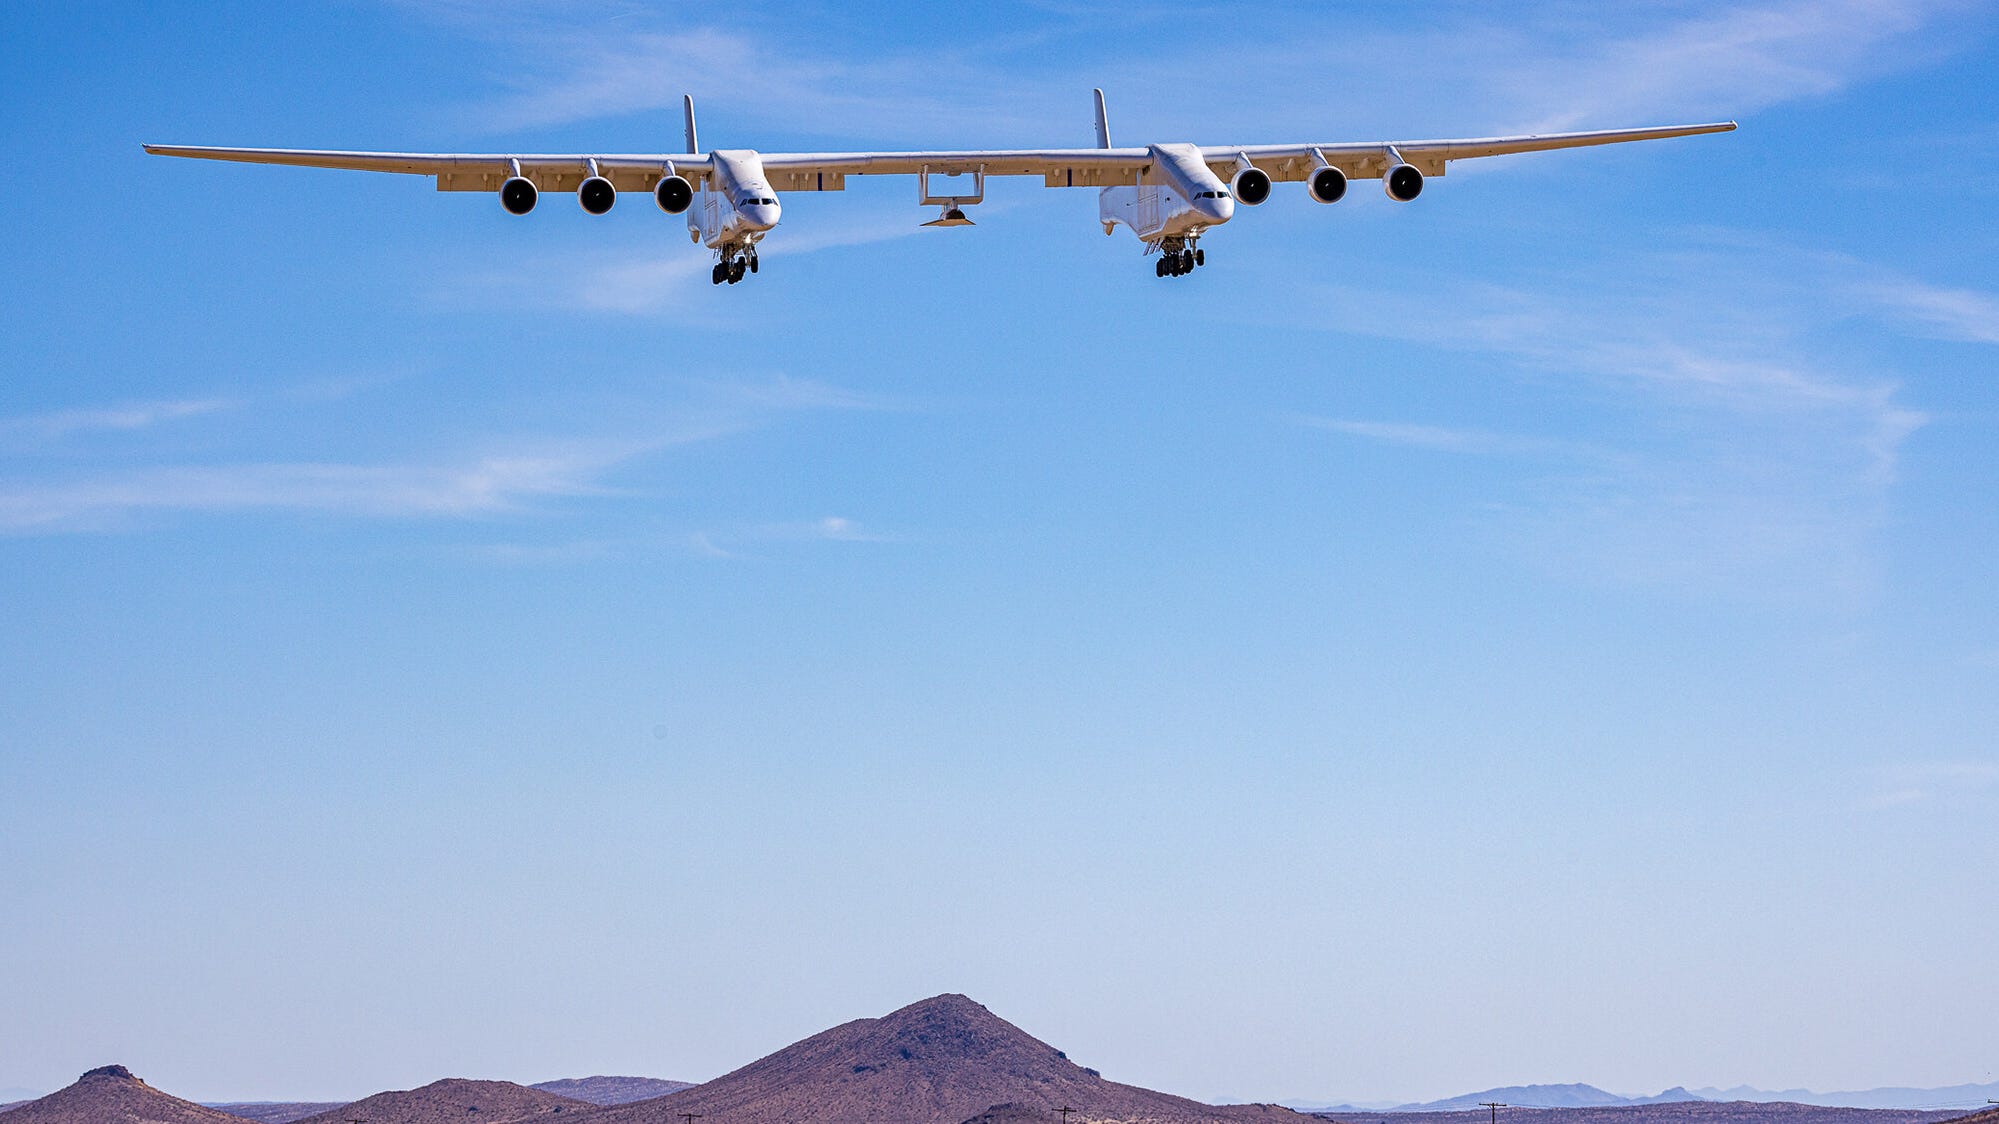 The biggest plane in the world has wings longer than a football field. See its latest flight